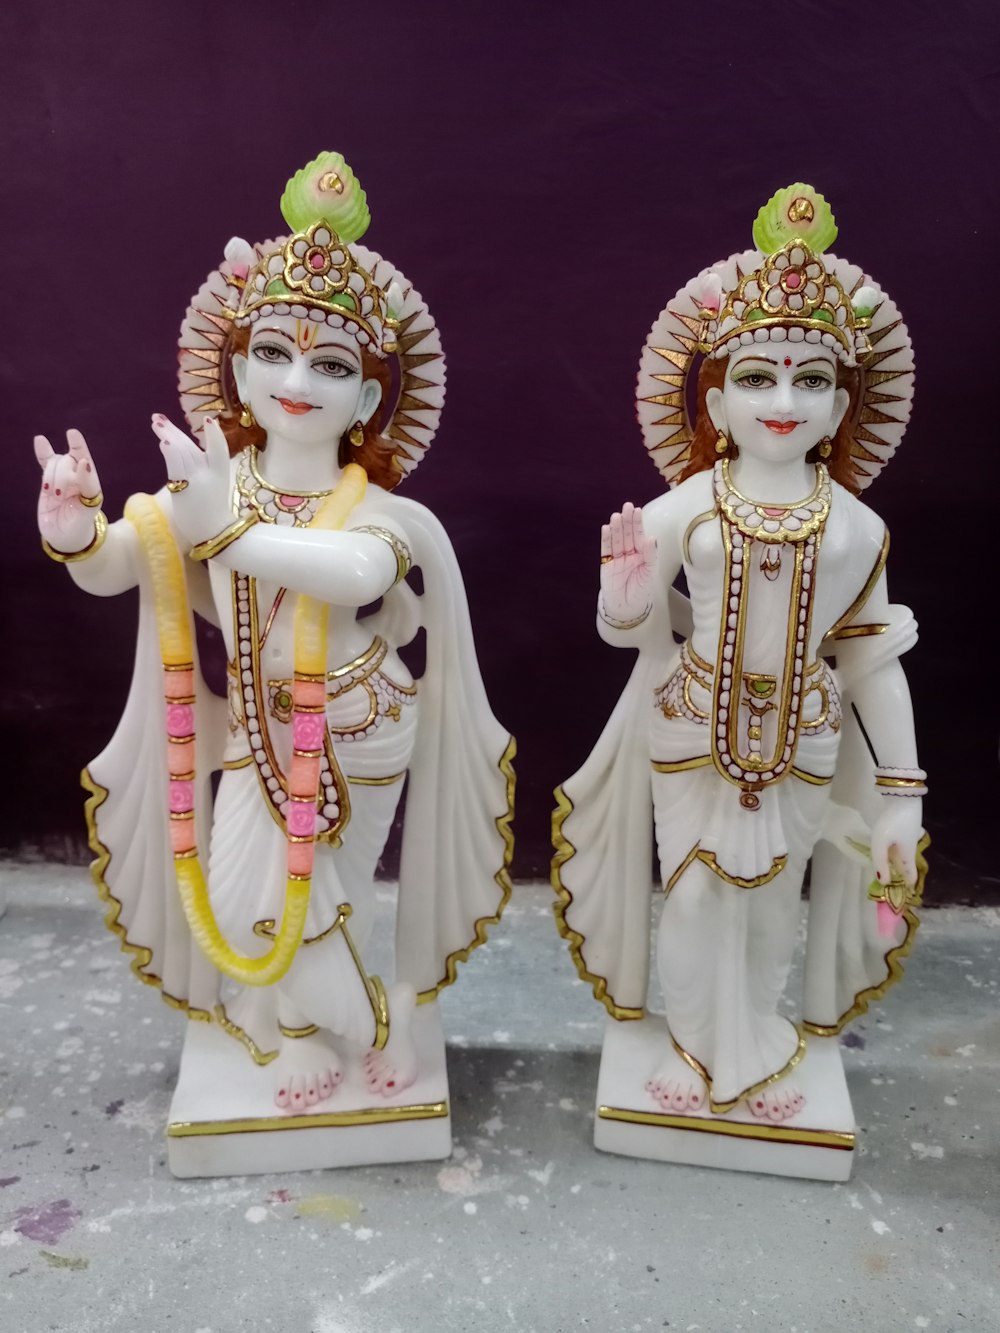 2 gold and red hindu deity figurines